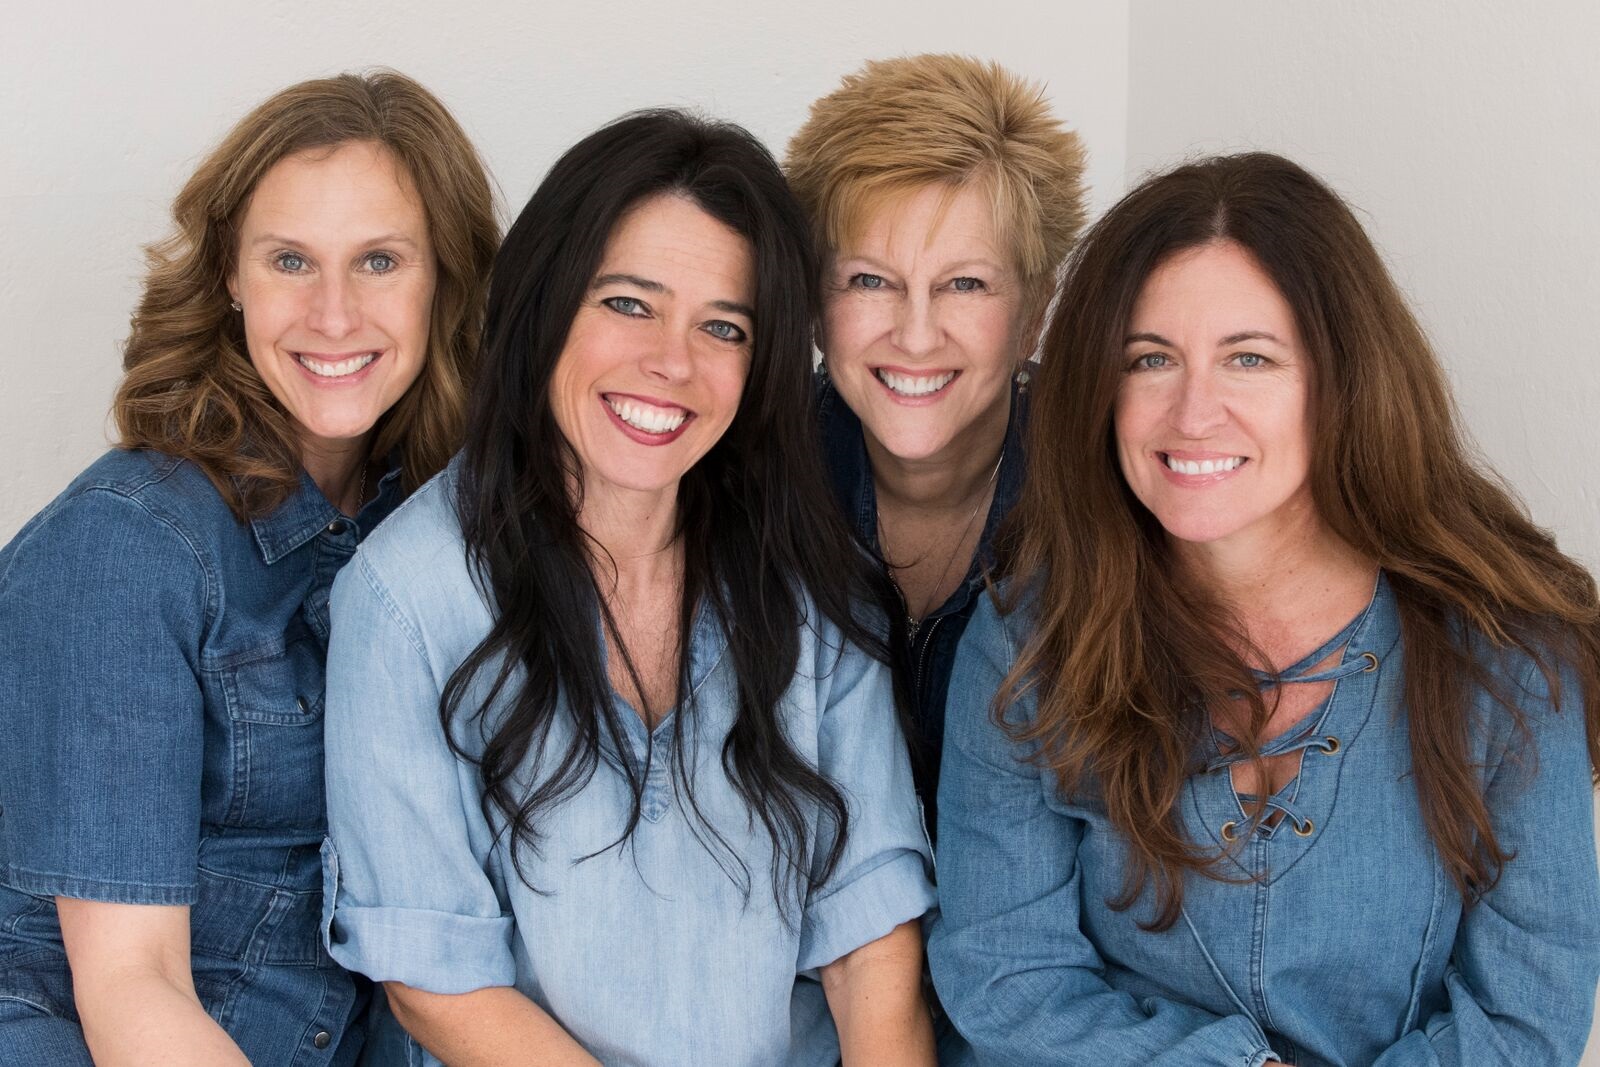 The 4 chicks sitting and smiling all in denim blue